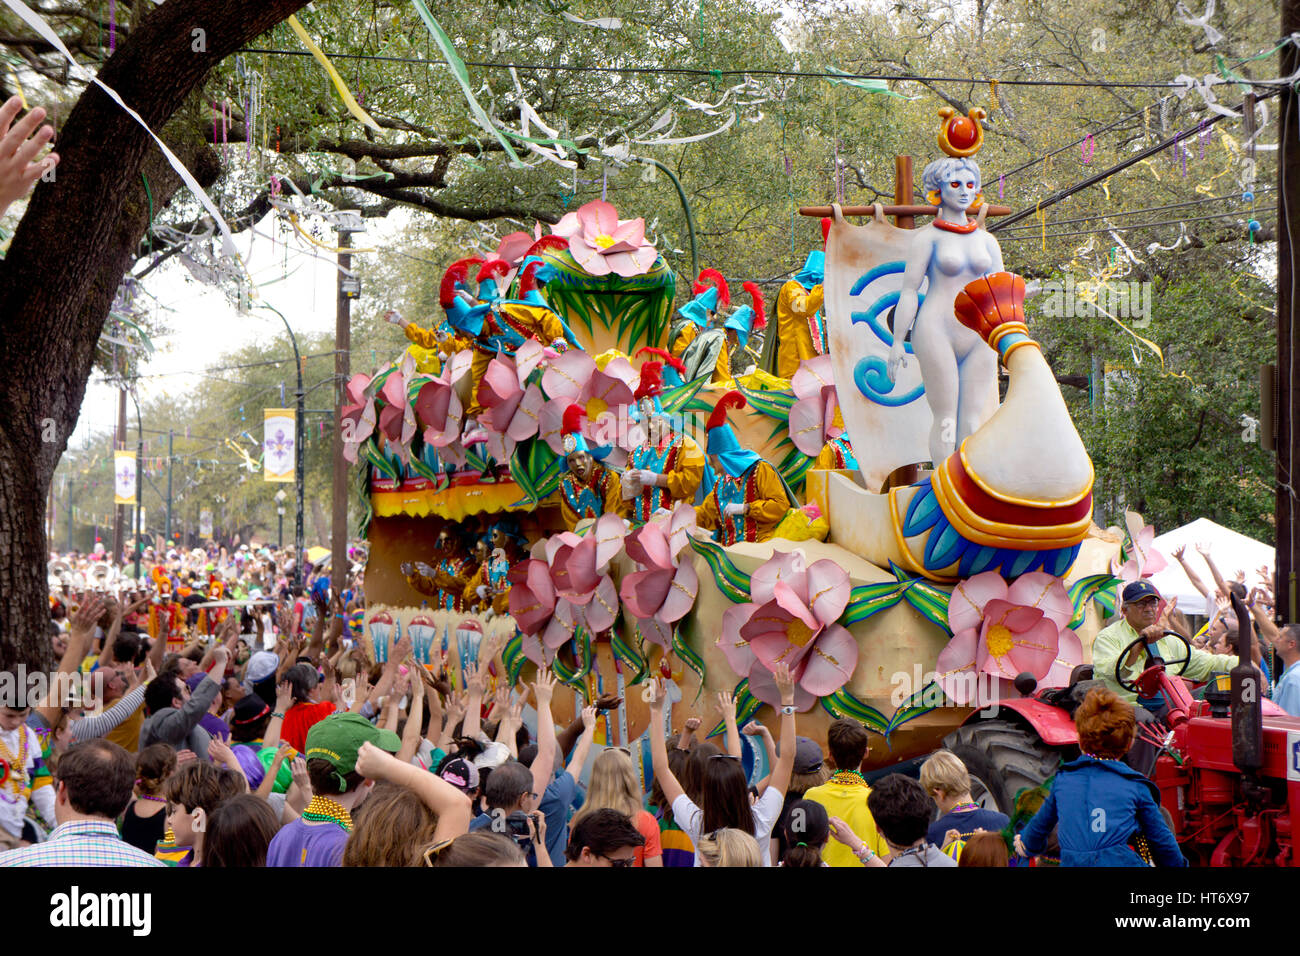 A parade float with crowd of revelers on Mardi Gras day in New Orleans. Stock Photo